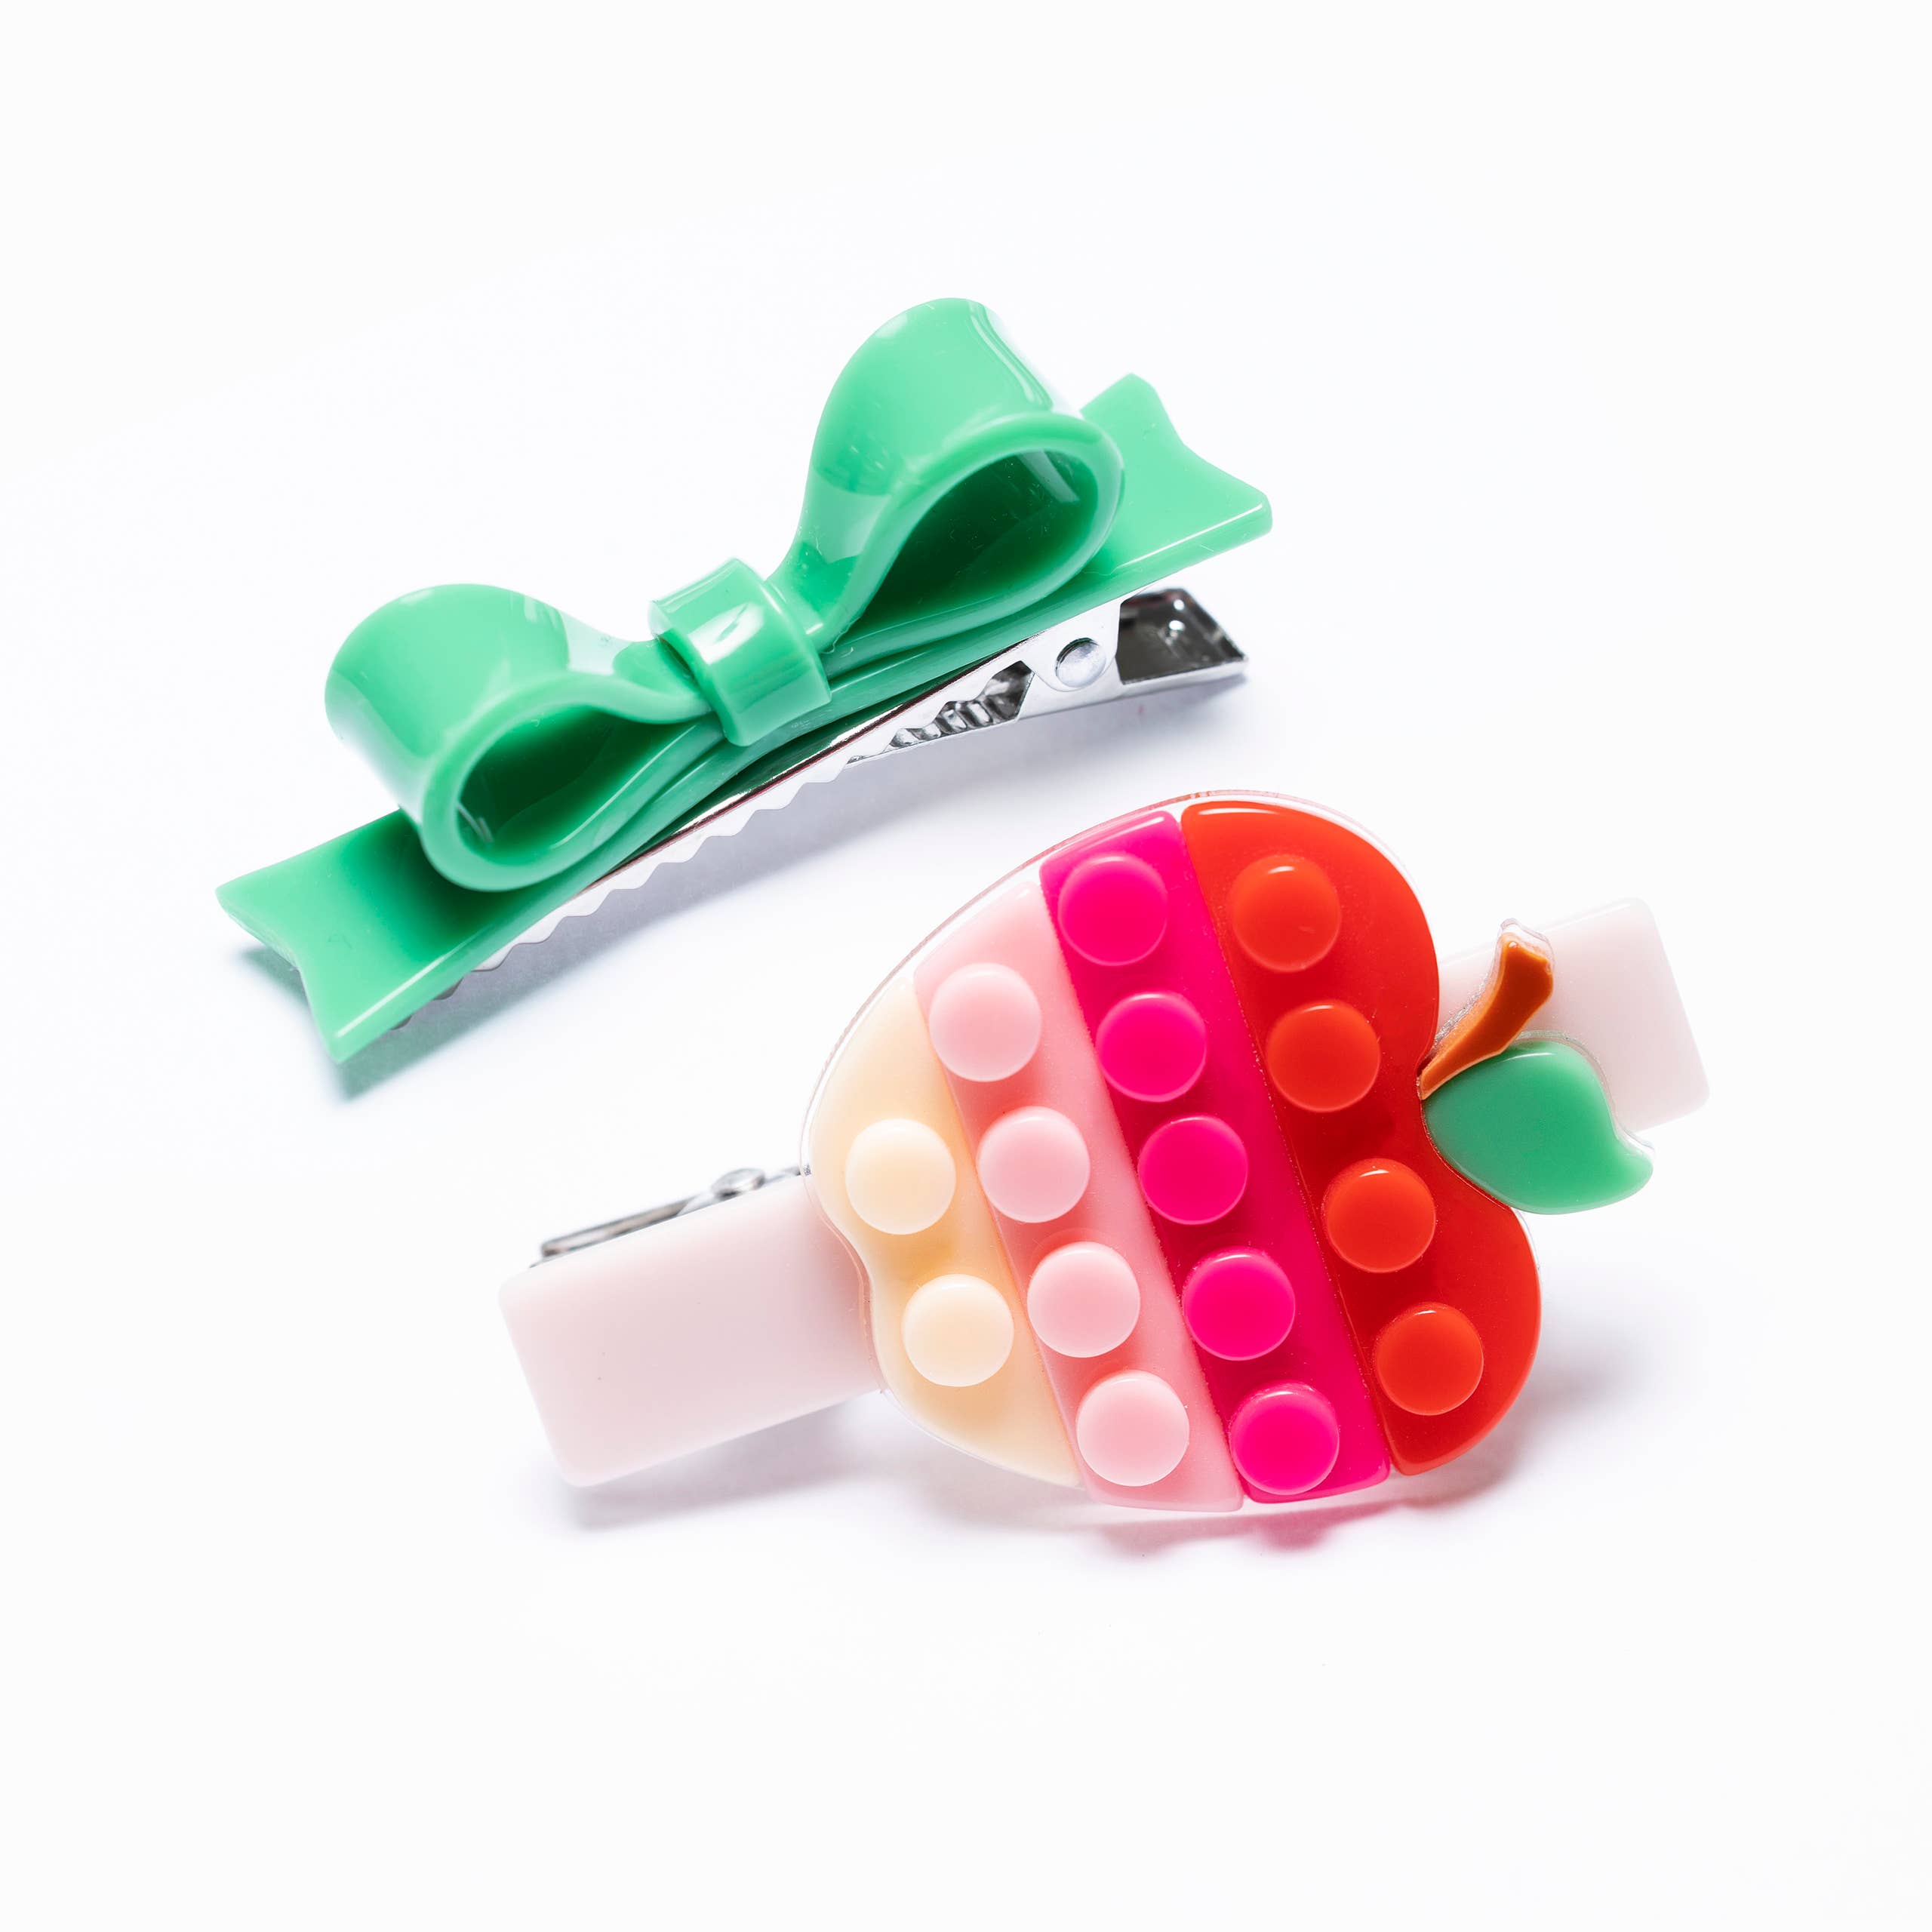 Playful Apple Pink Shades & Bowtie Green Clips